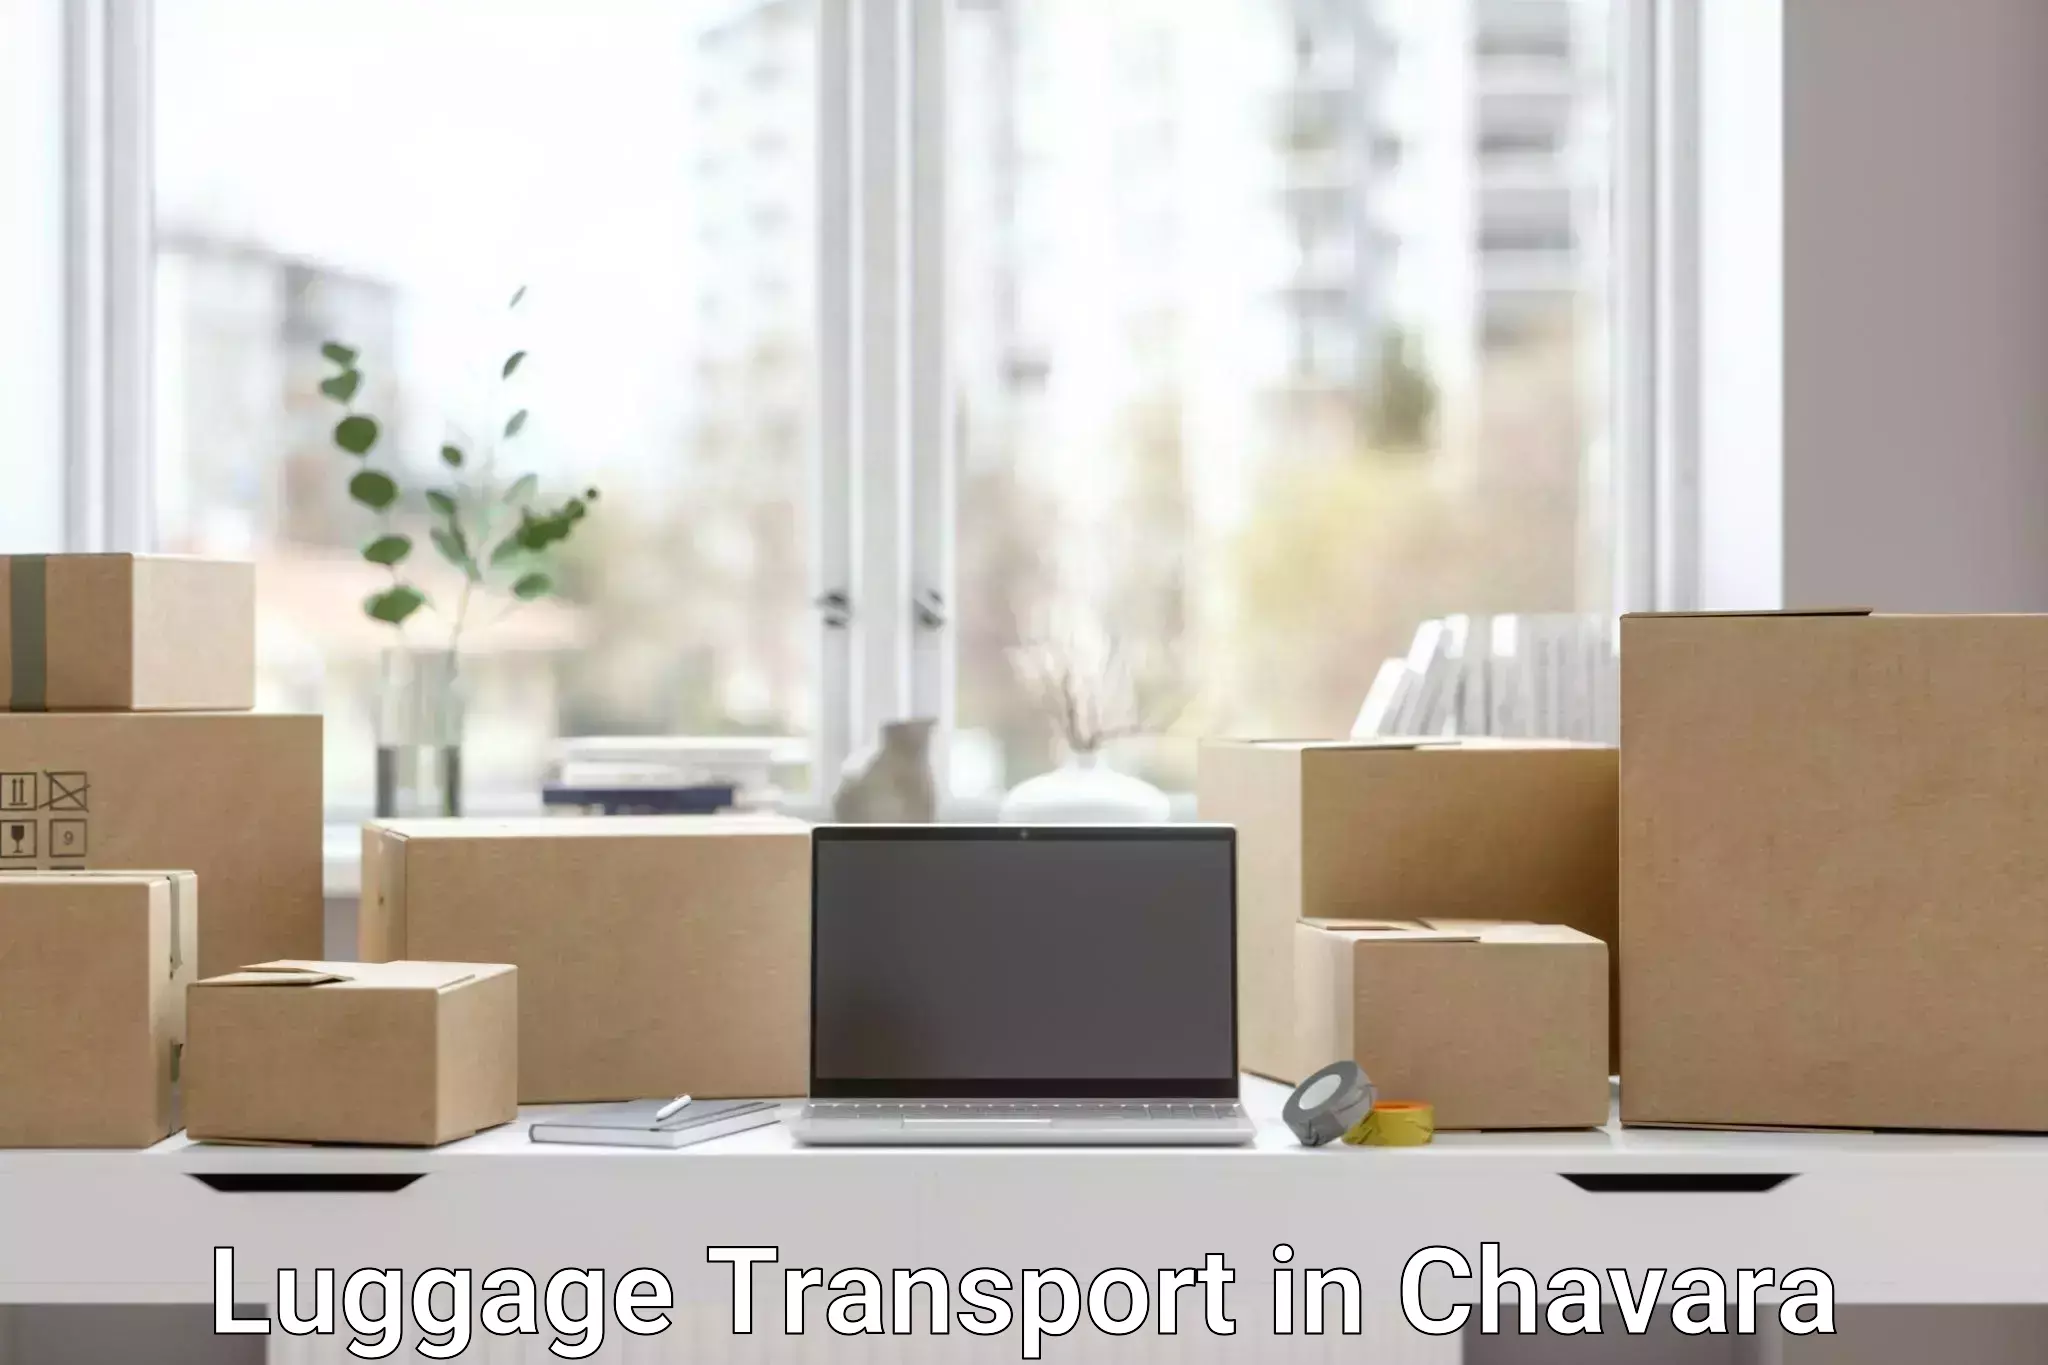 Luggage delivery optimization in Chavara